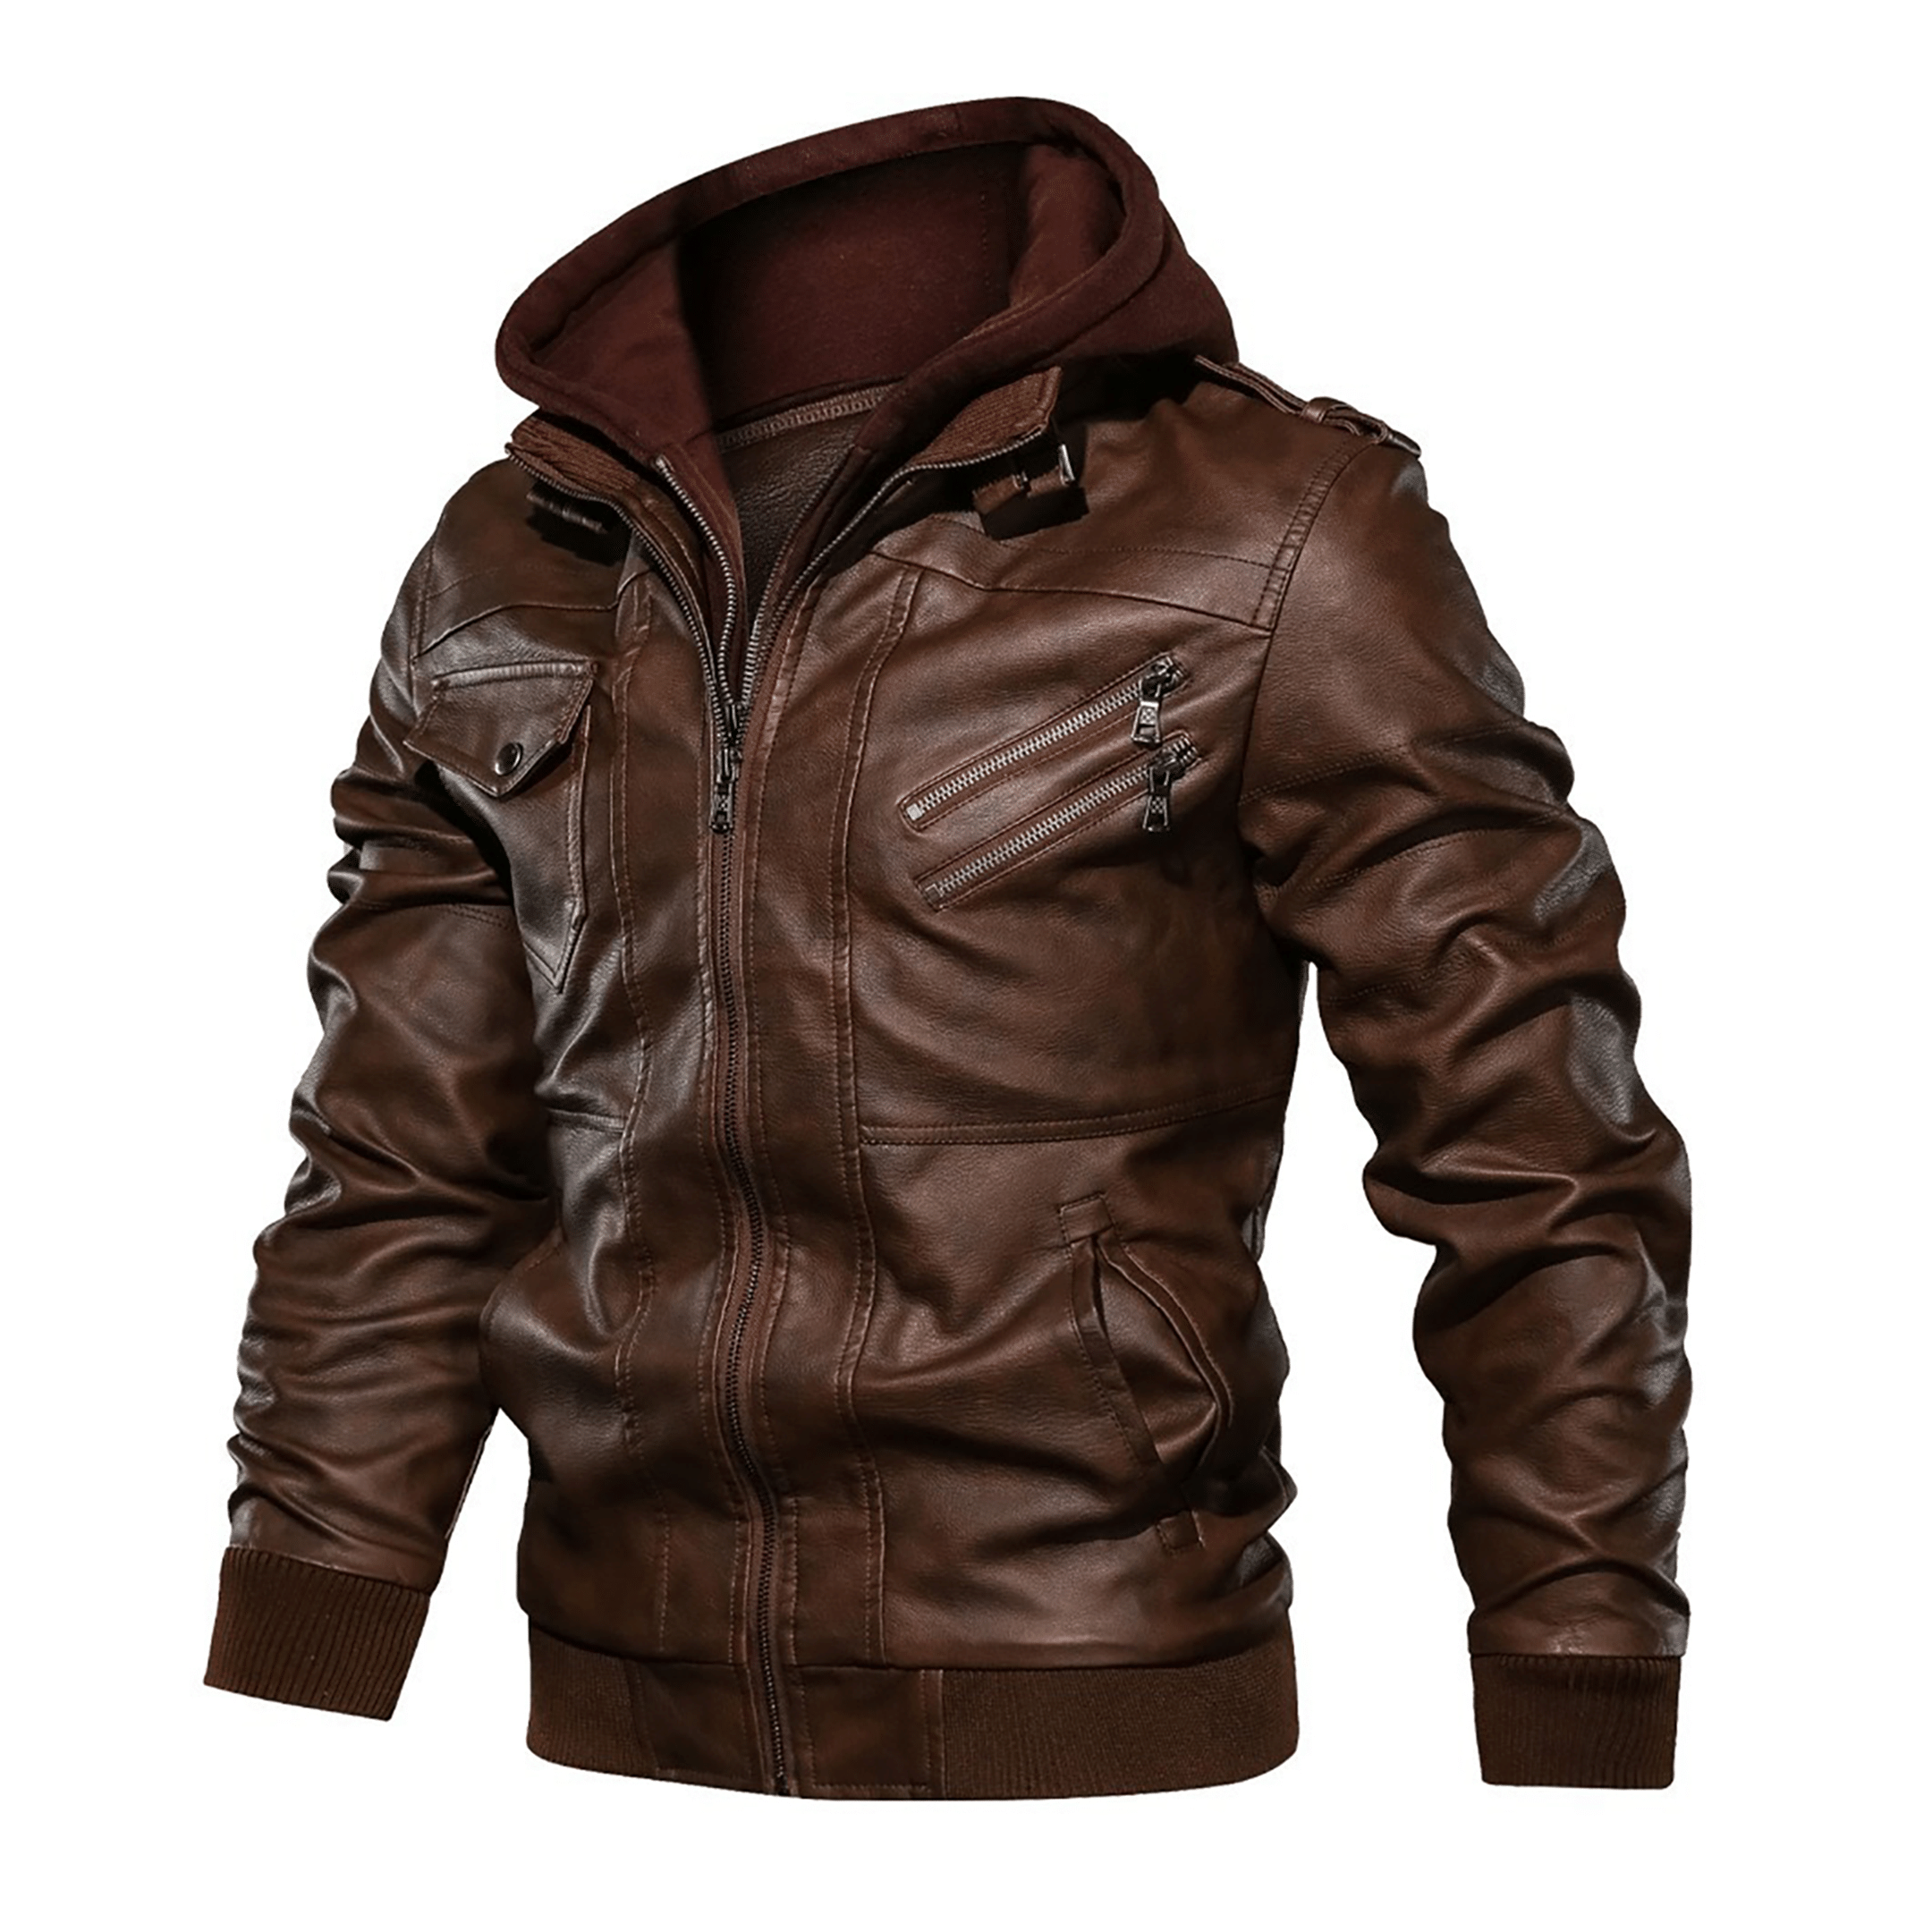 Top leather jackets and latest products 279